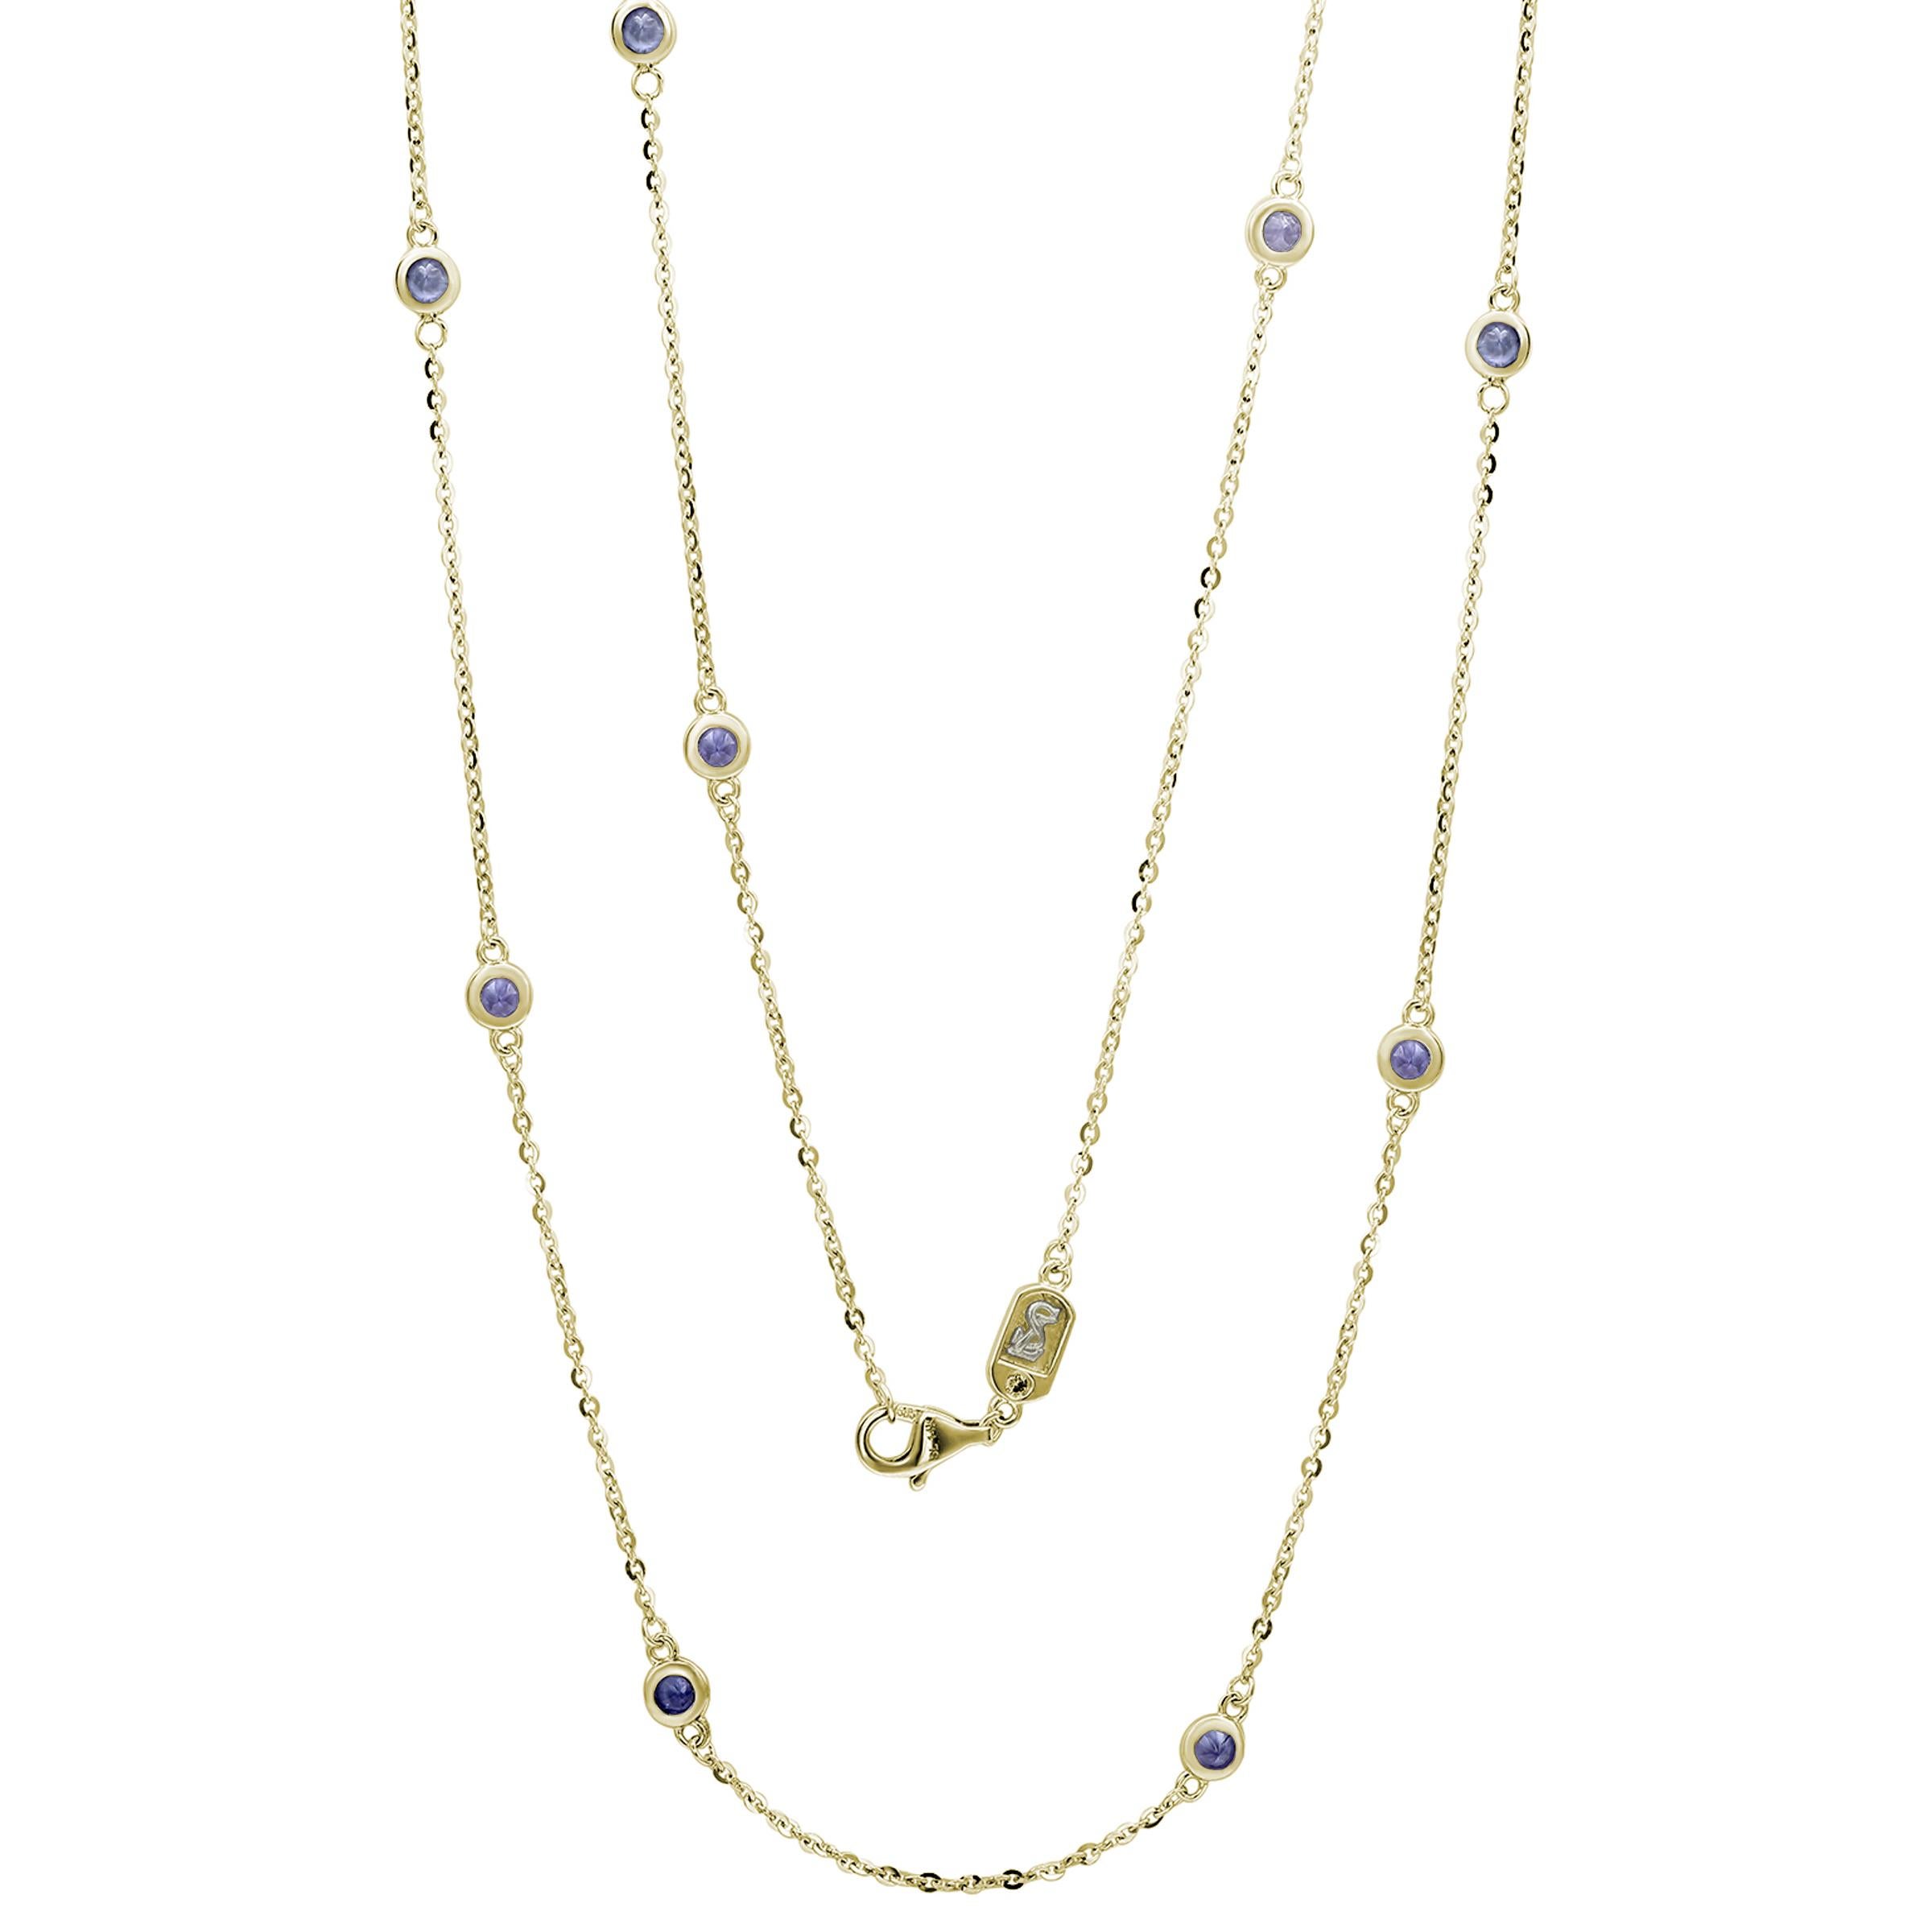 Adorn your neck with sparkling shimmers with this beautiful tanzanite station necklace. This necklace can be worn stackable with other necklaces or as a single necklace, making it the perfect necklace for every occasion. This necklace features nine